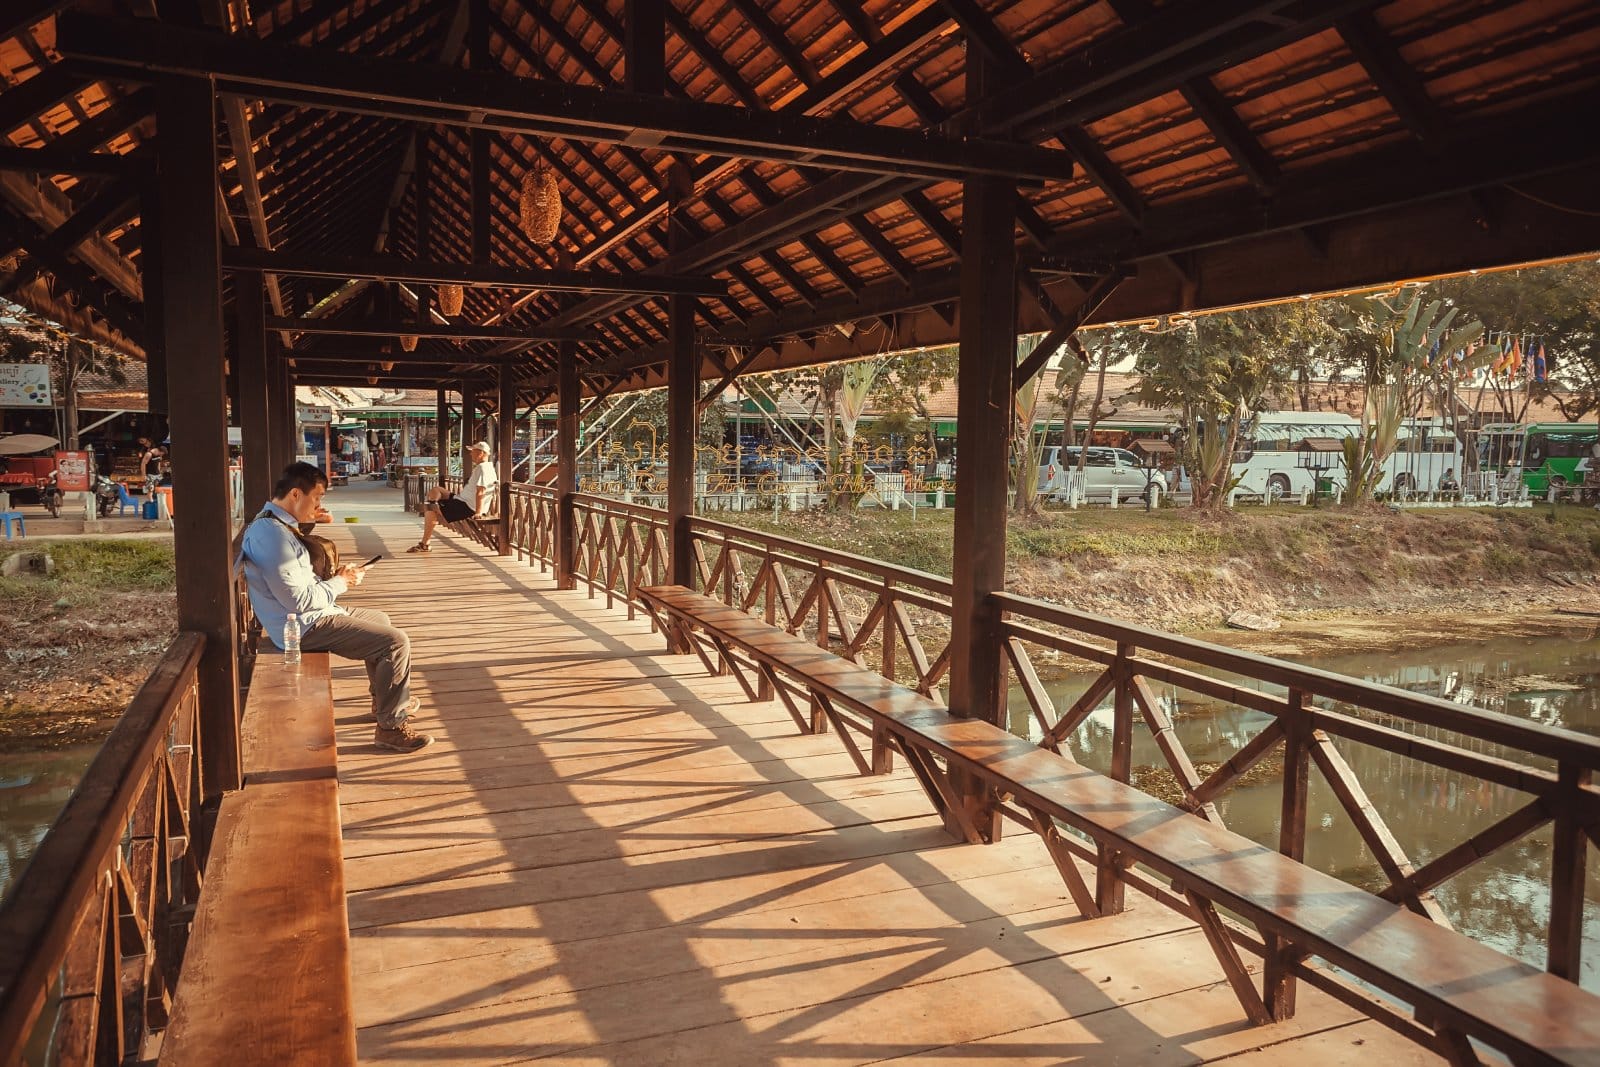 <p><span>As the day winds down, take a stroll or a relaxing bike ride along the Siem Reap River. Lined with trees and small parks, the river provides a serene escape from the city’s hustle and bustle. </span></p> <p><b>My Insider’s Tip: </b><span>Stop by one of the riverside cafes for a refreshing drink and watch the world go by.</span></p>